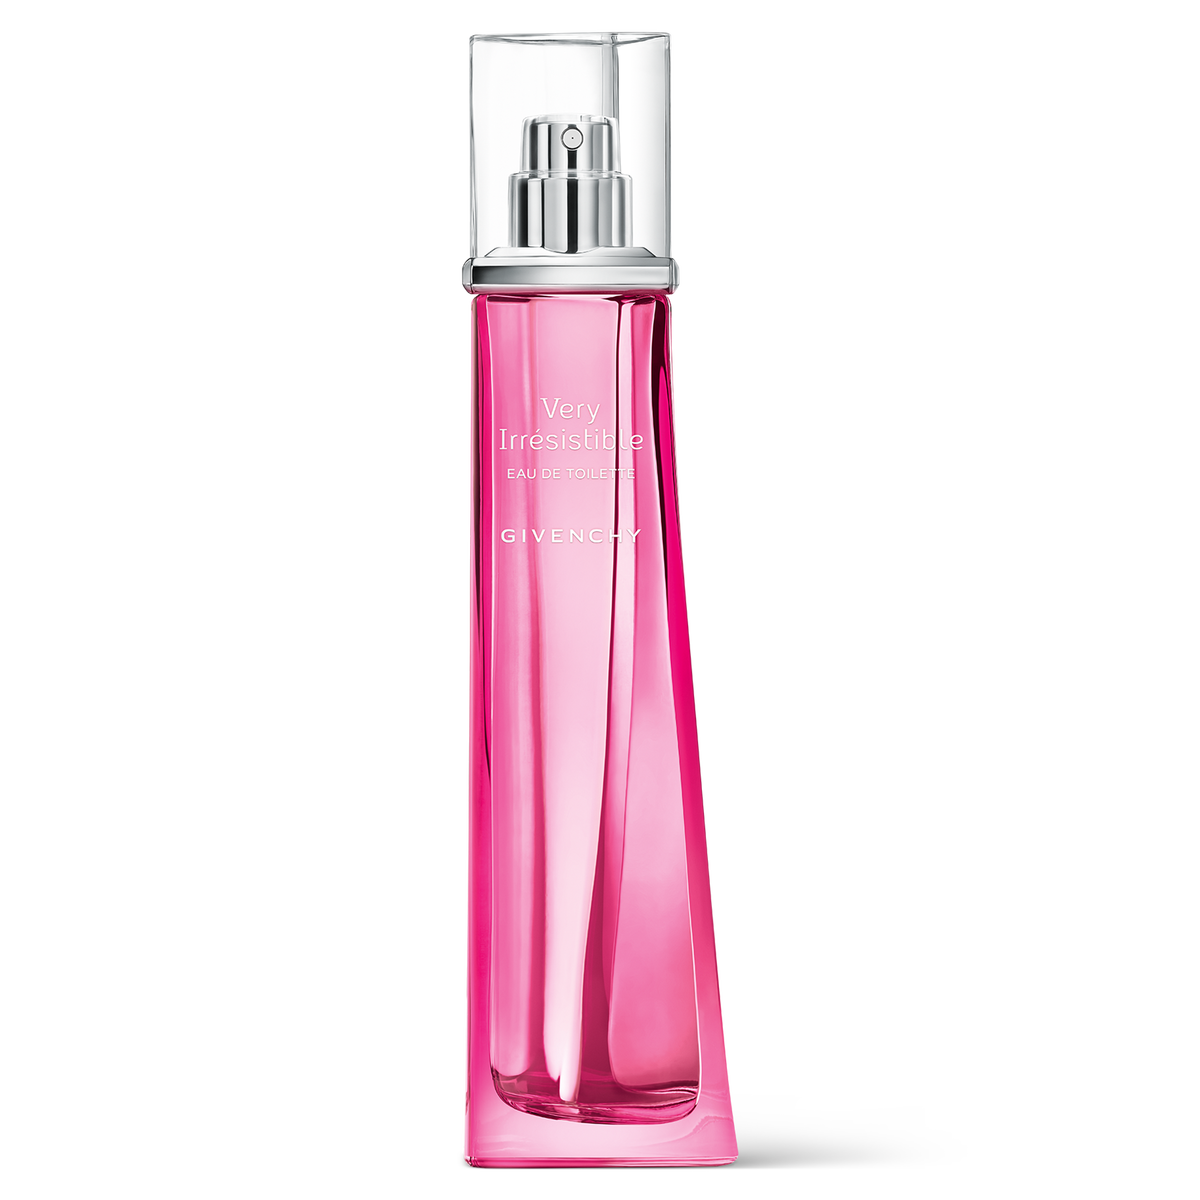 Very Irresistible By Givenchy For Women. Eau De Toilette Spray 2.5 Ounces 2.5 Fl Oz (Pack of 1)